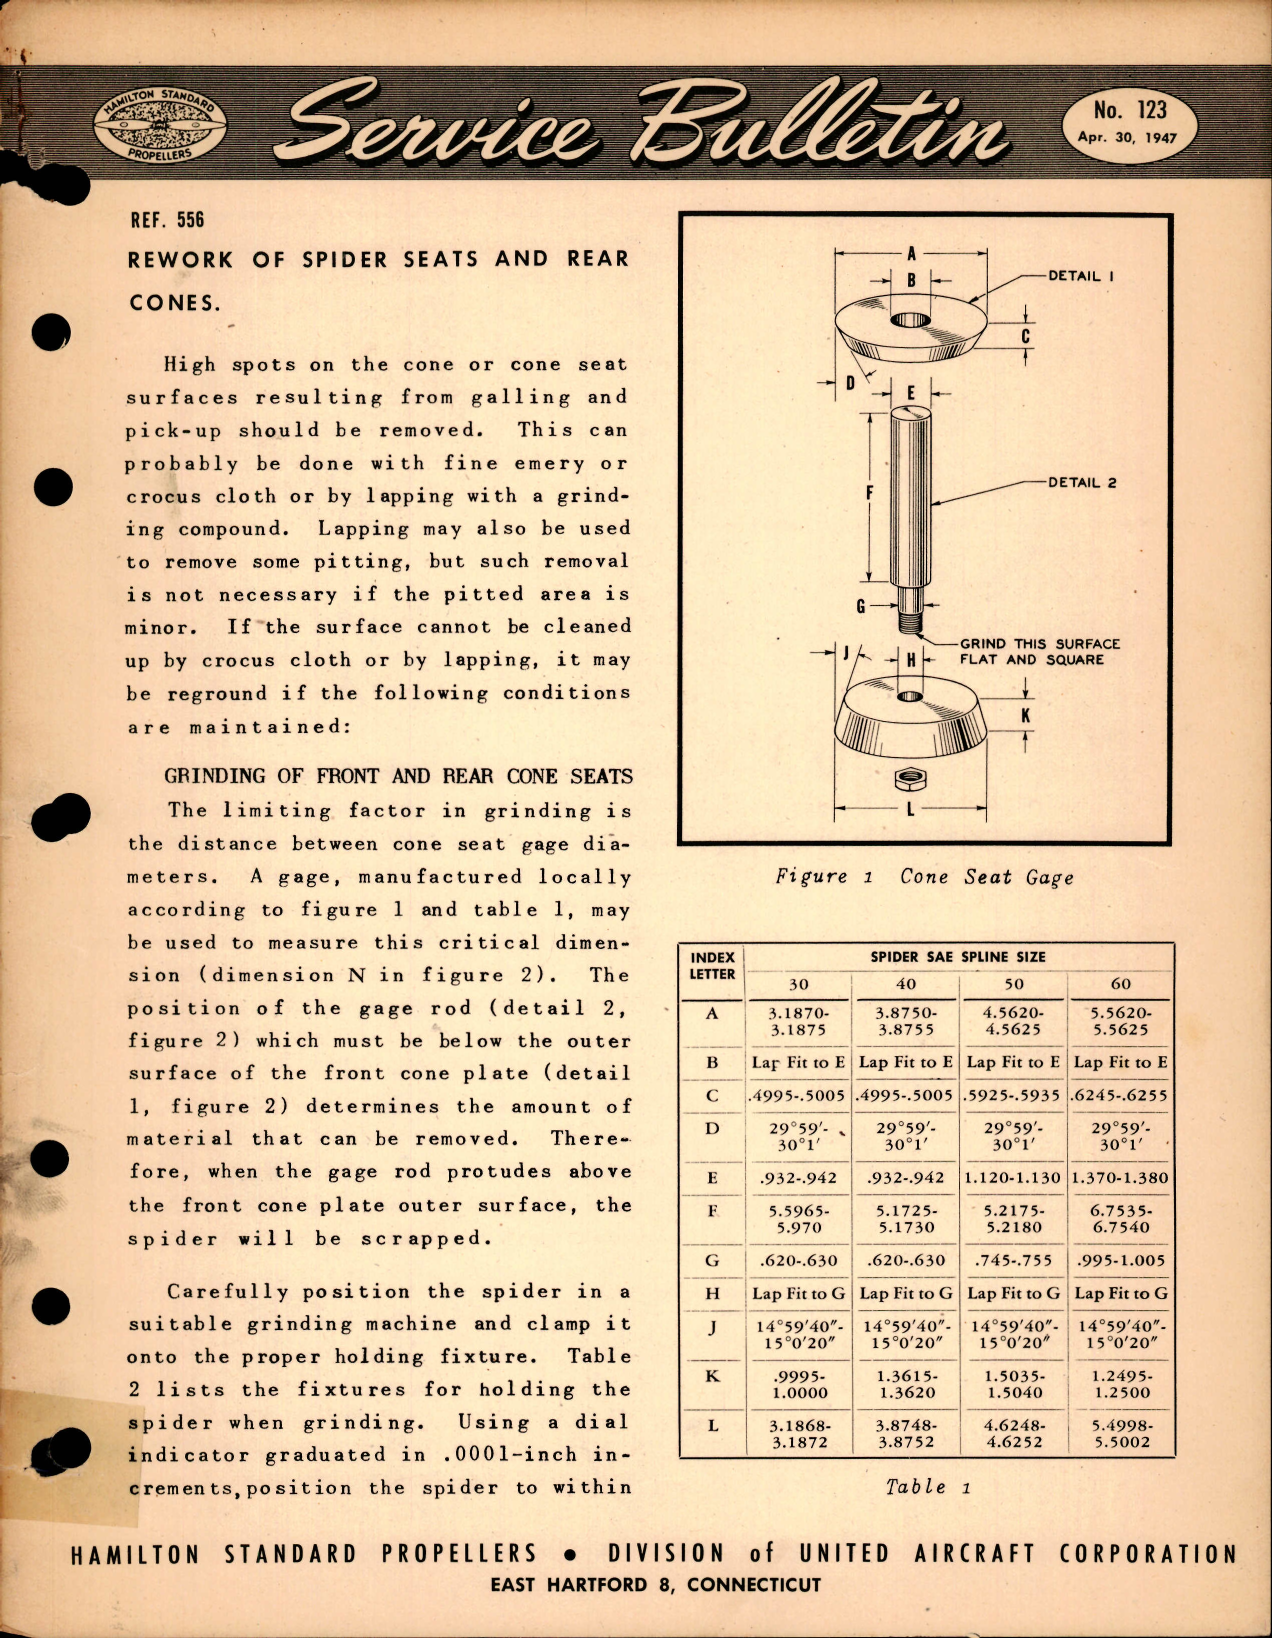 Sample page 1 from AirCorps Library document: Rework of Spider Seats and Rear Cones, Ref 556